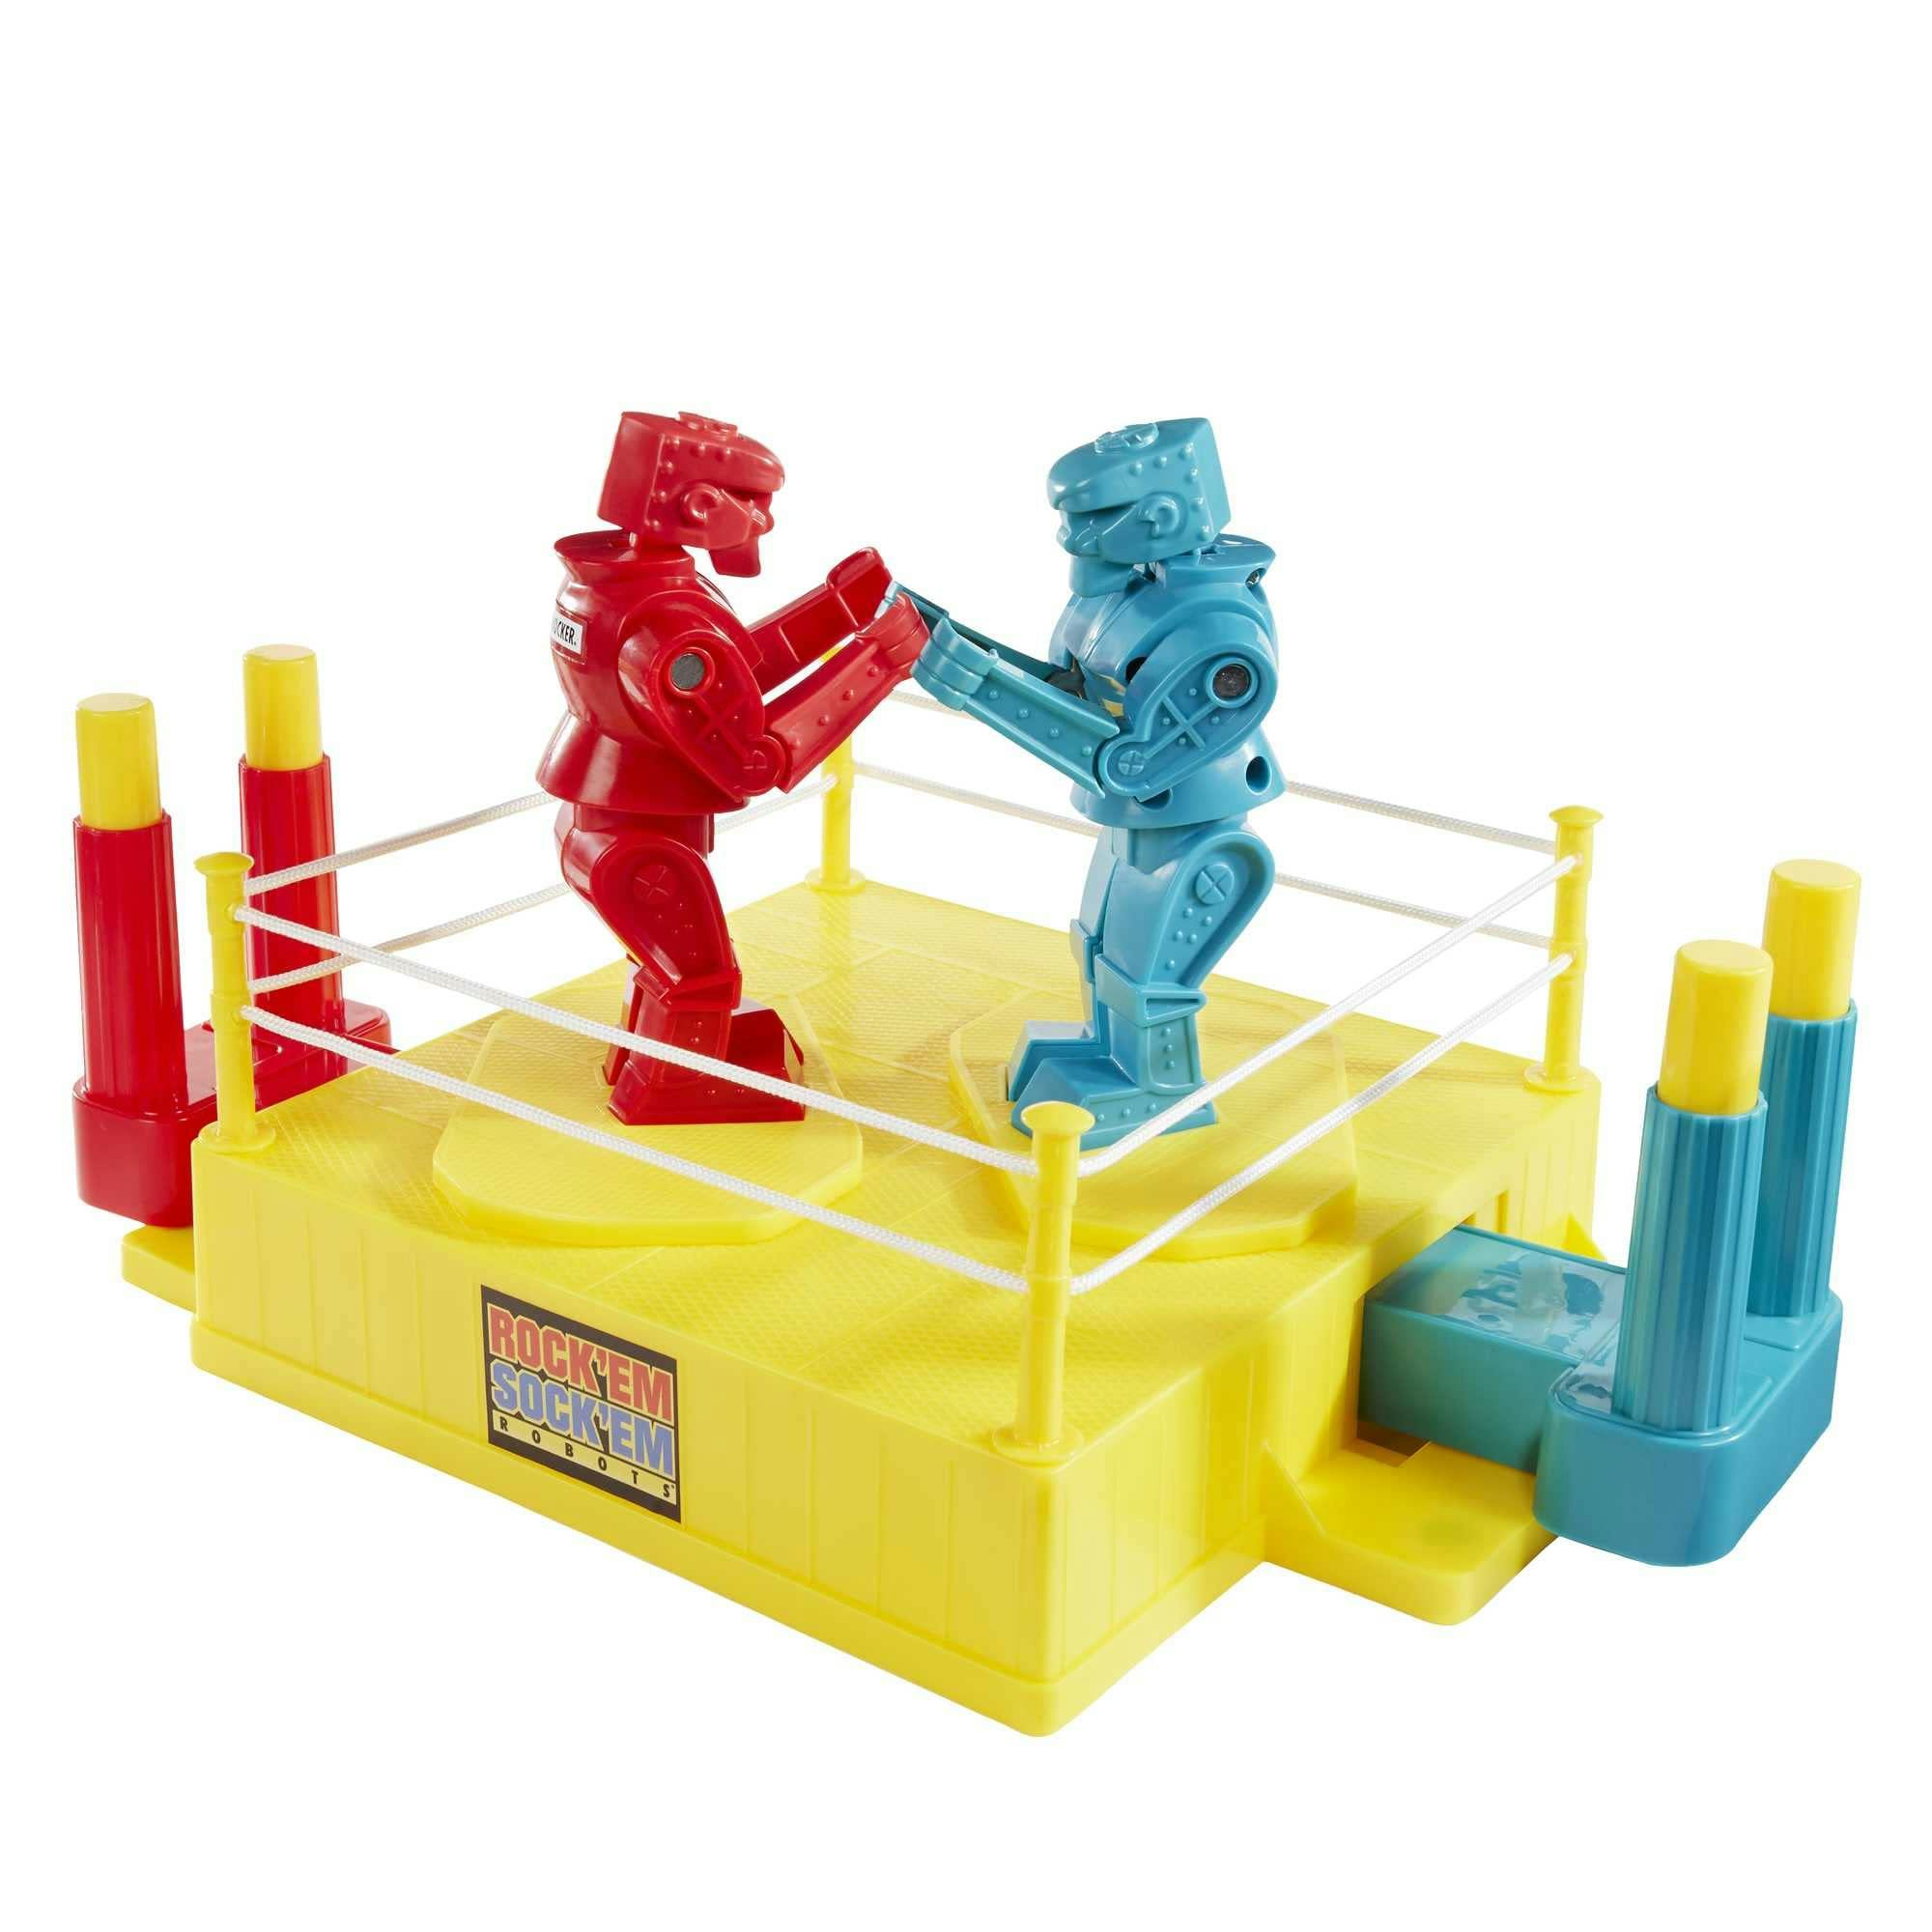 The rockem sockem robots toy that signifies the competition between the chatbots compared in the article.